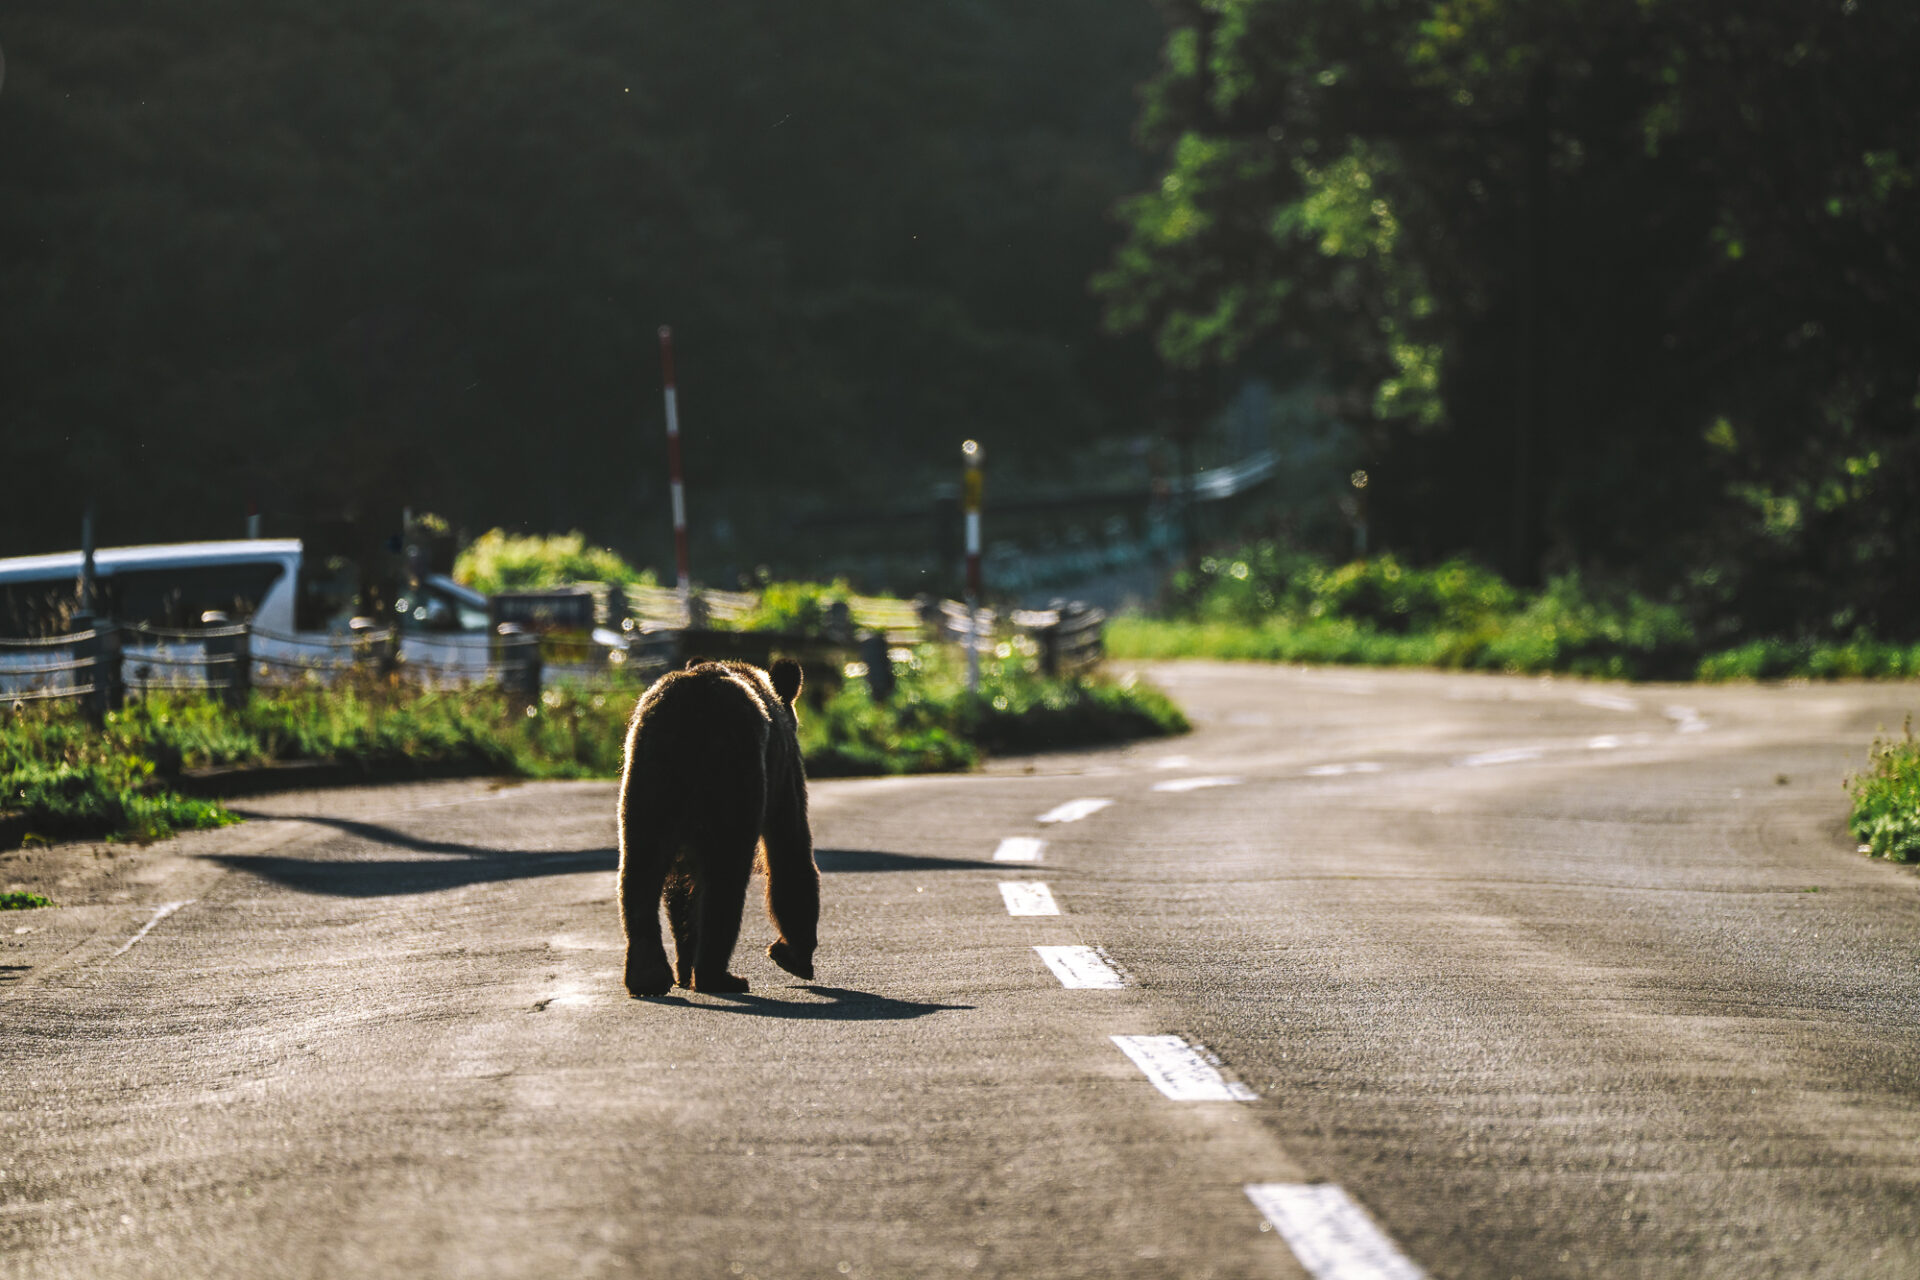 Our accidental bear sighting on the road in Shiretoko National Park